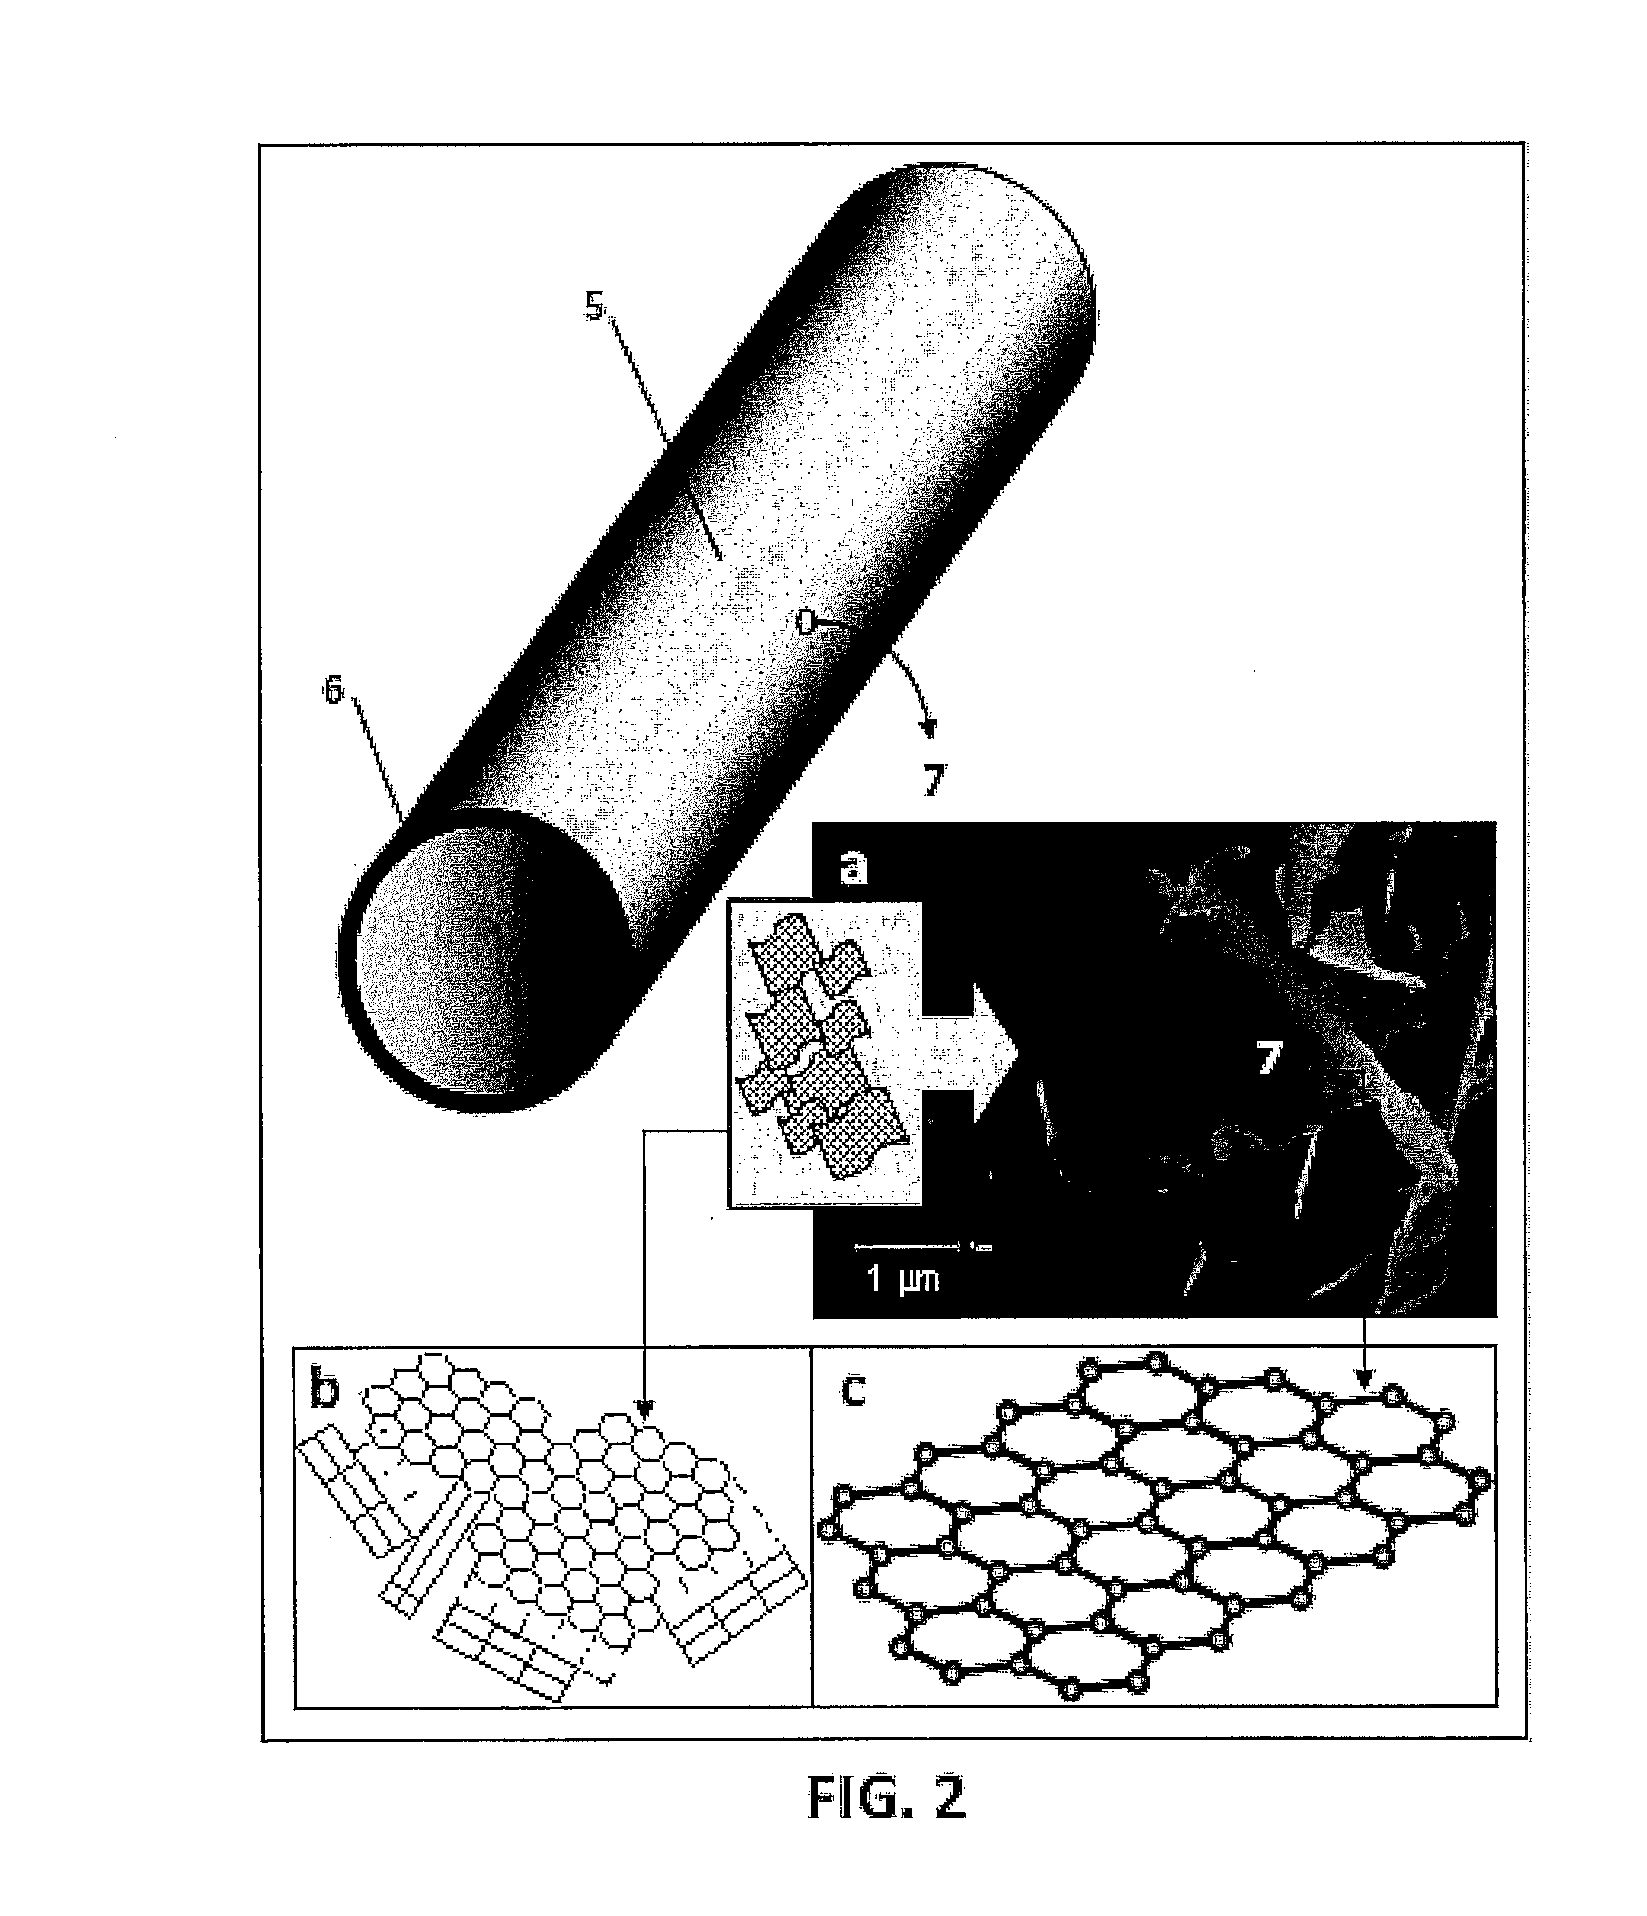 Graphene-based steel tubes, pipes or risers, methods for the production thereof and the use thereof for conveying petroleum, gas and biofuels